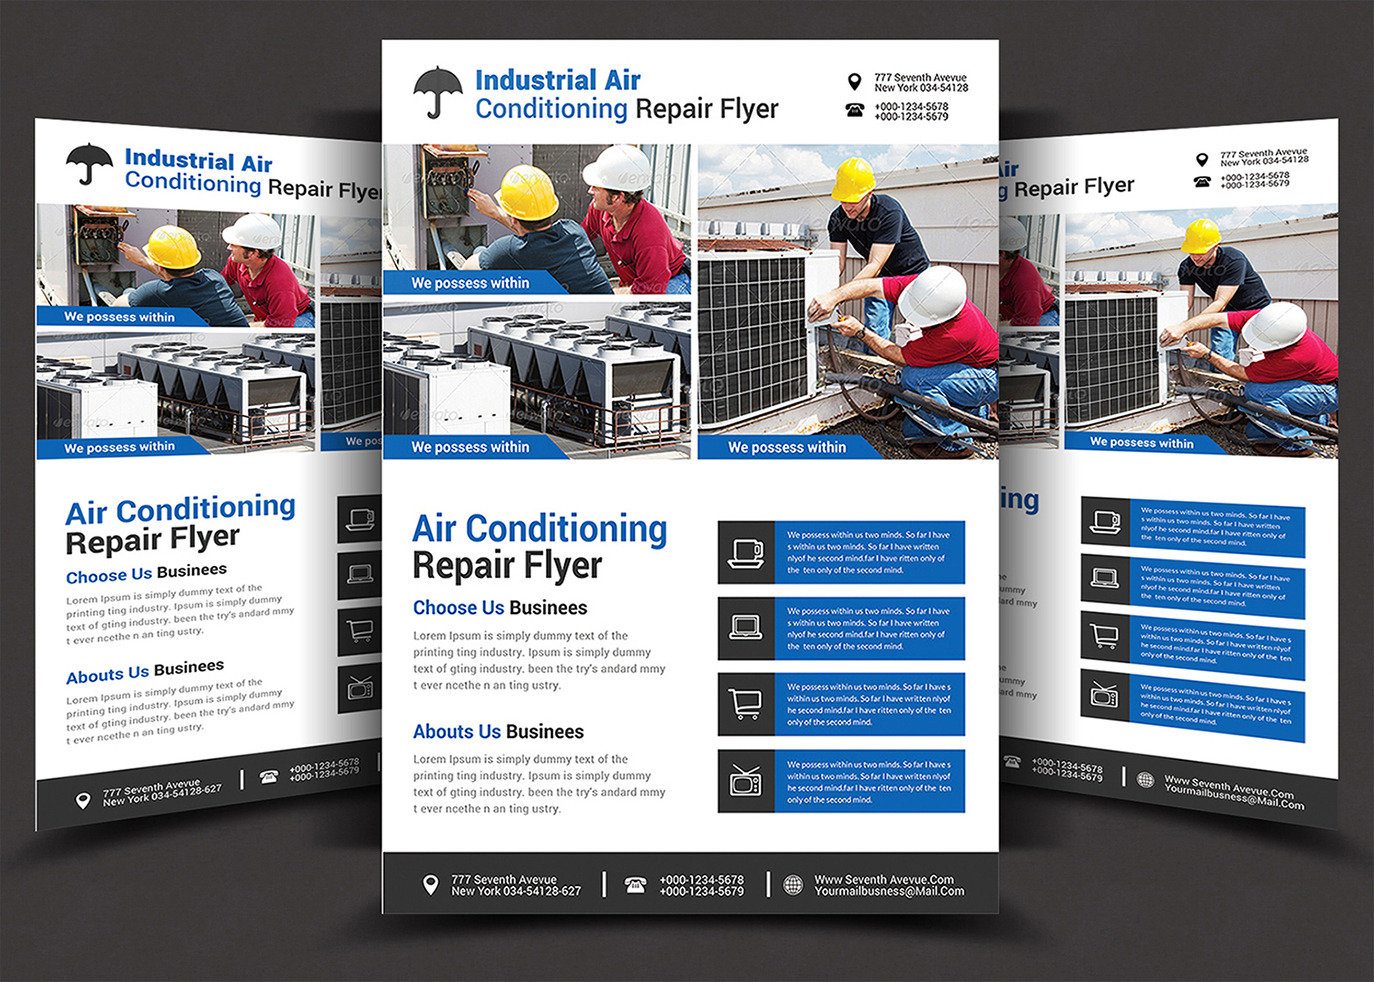 Air Conditioning Repair Flyer-2 ~ Flyer Templates 